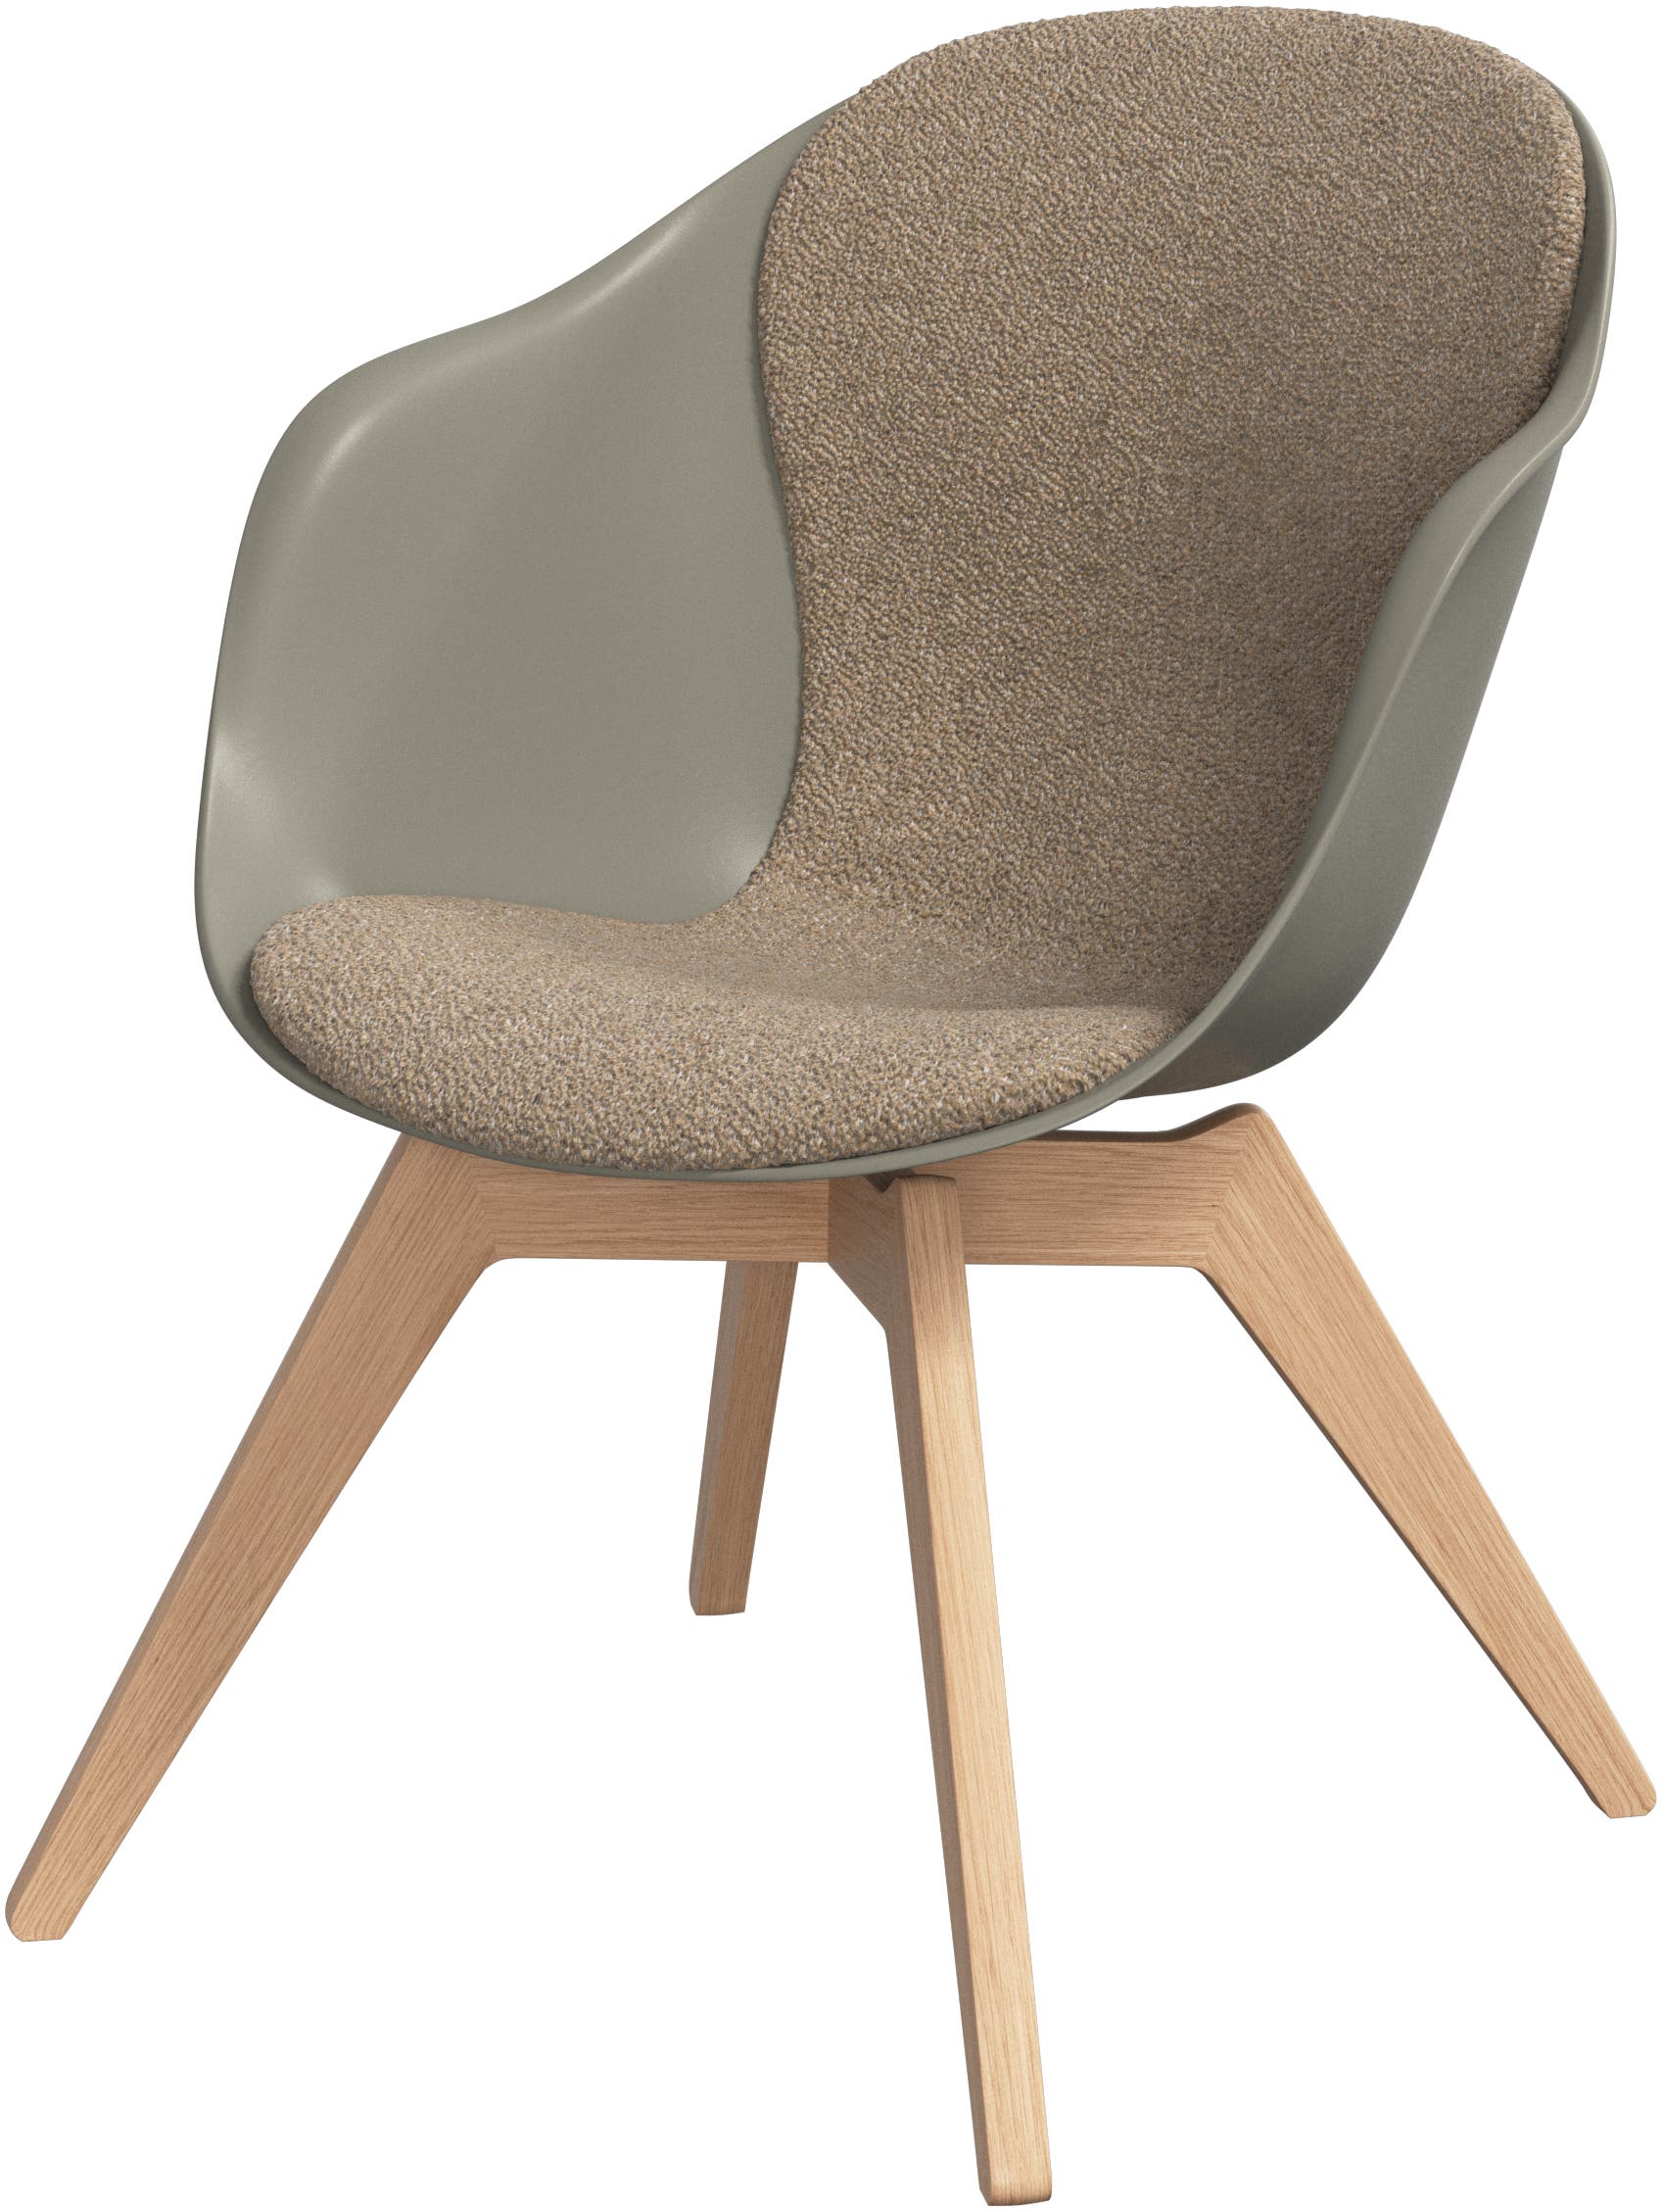 Adelaide lounge chair